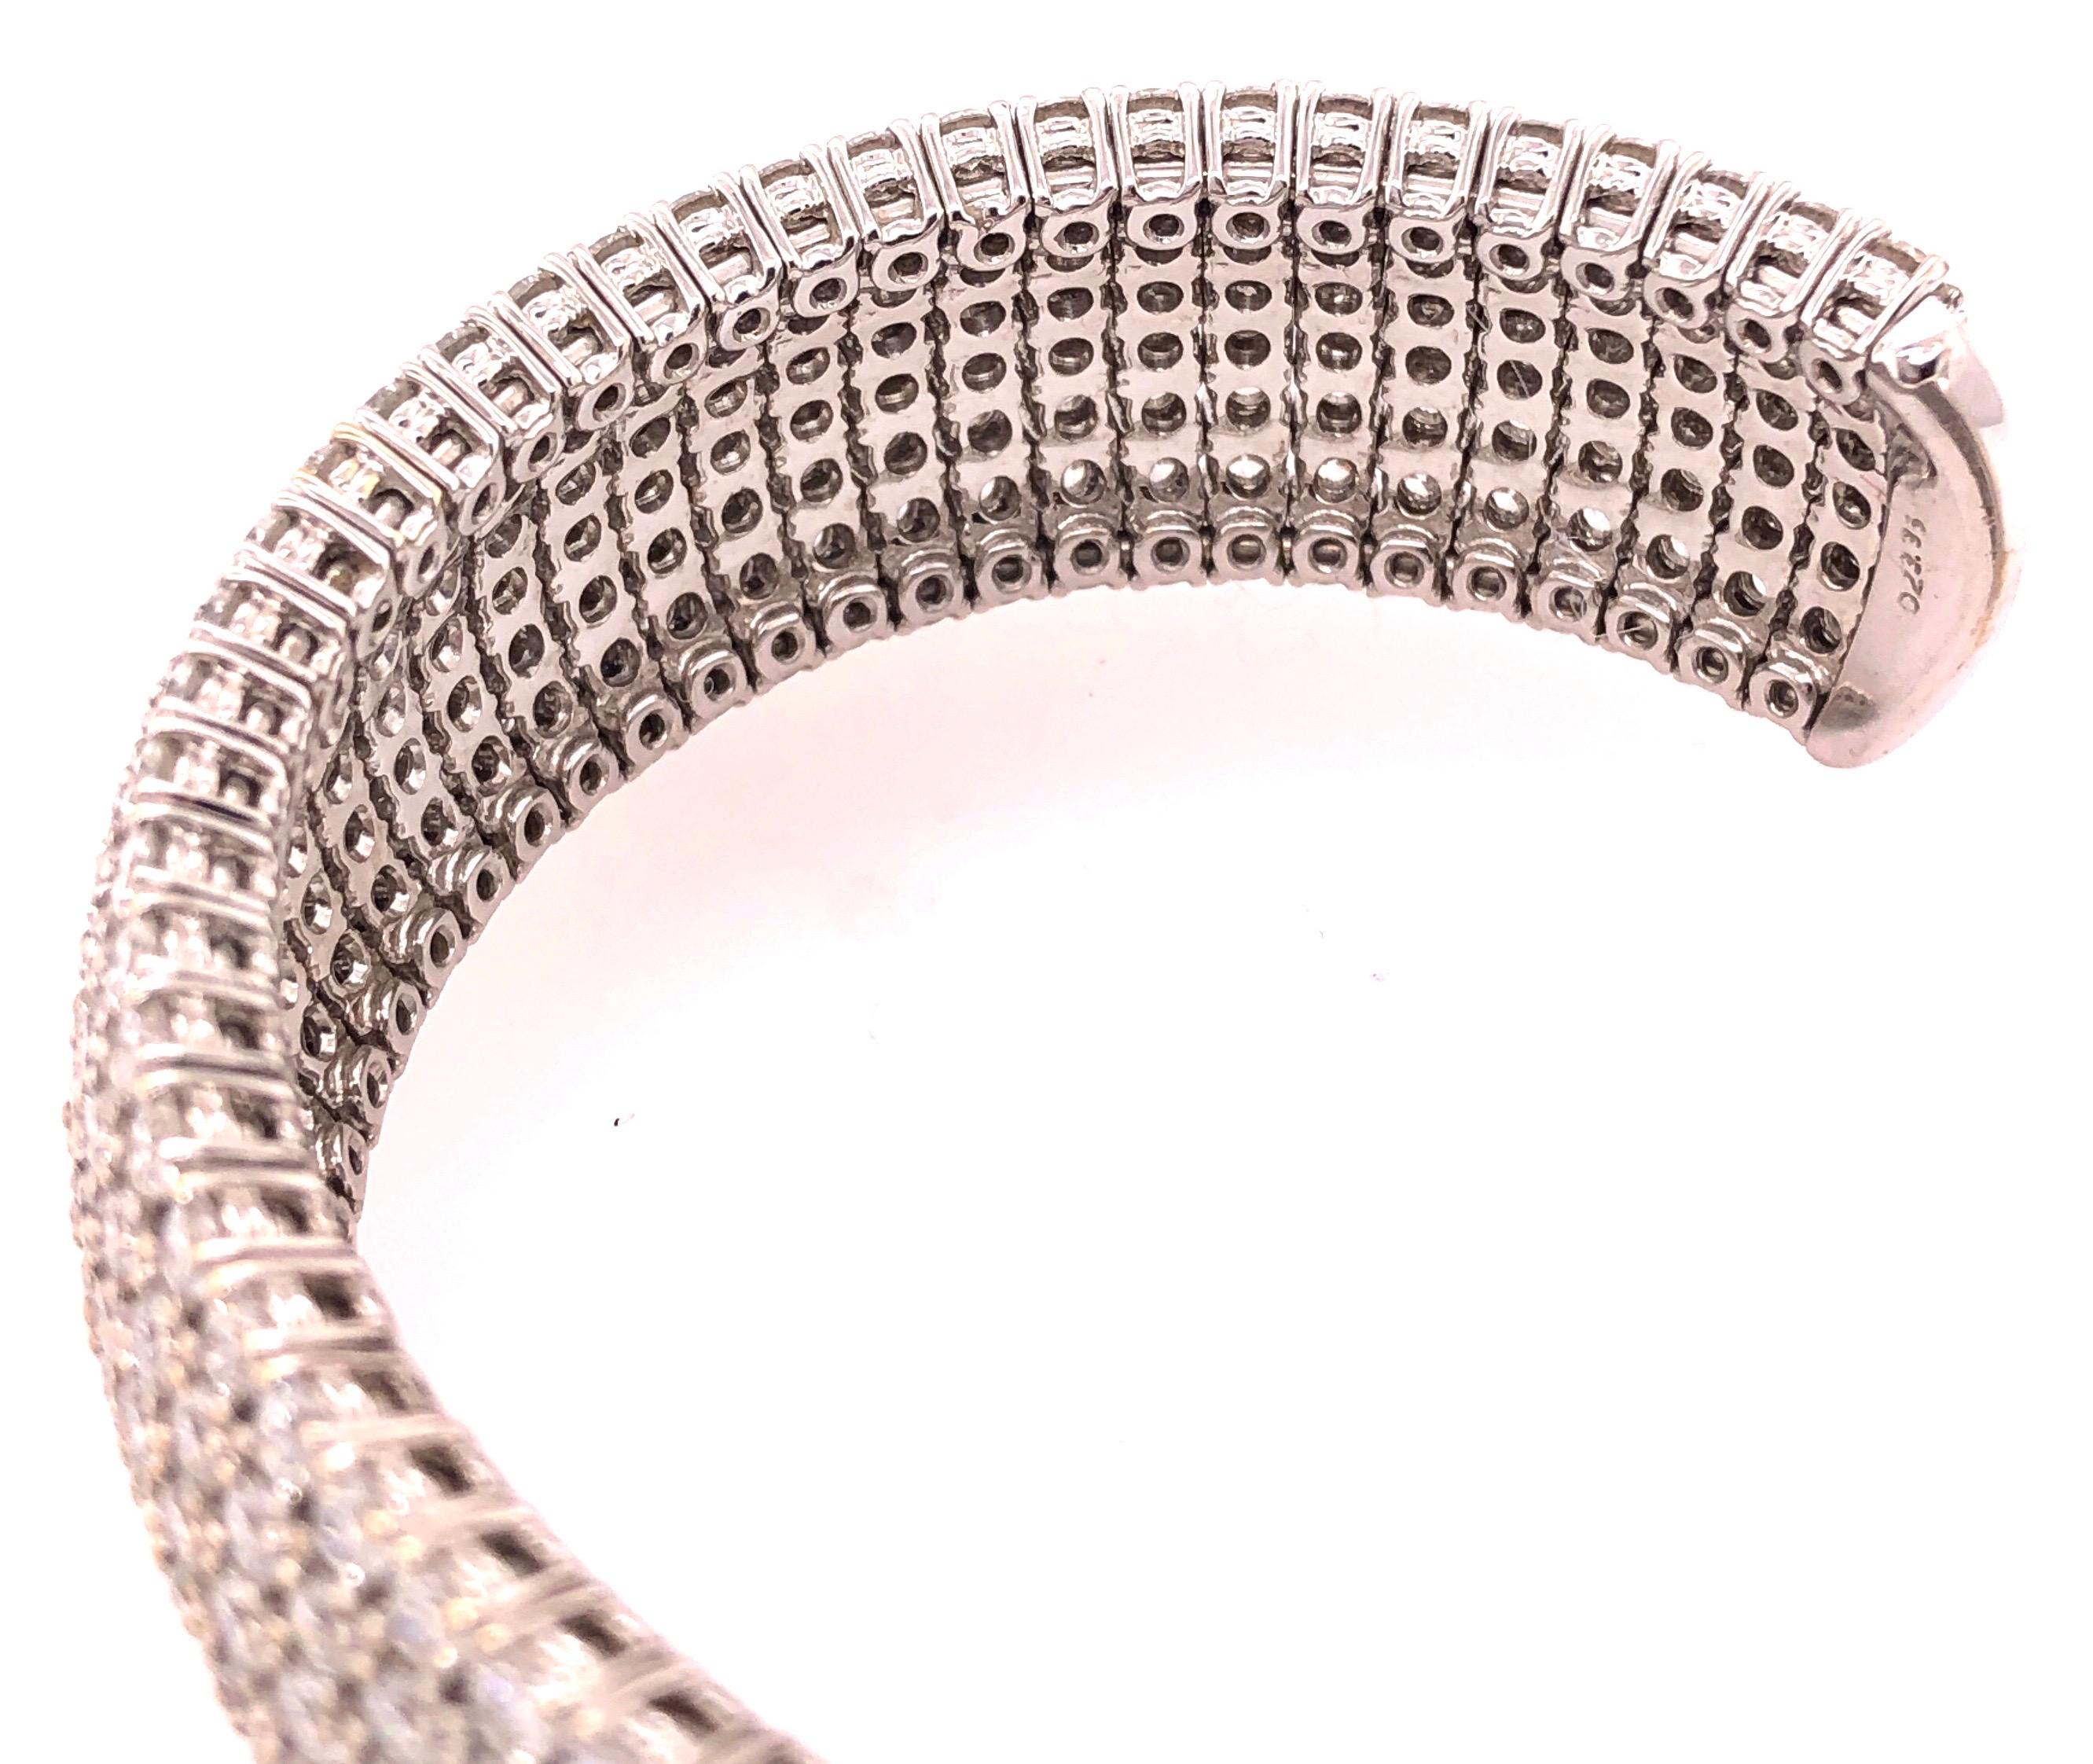 18 Kt White Gold & Diamond Cuff Bracelet Weighing Approx 32.89 Ct. This fine quality diamond bracelet of spring band design has a side cuff set entirely with circular cut diamonds totaling almost 33 carats in total. The whole mounted in 18 Kt white